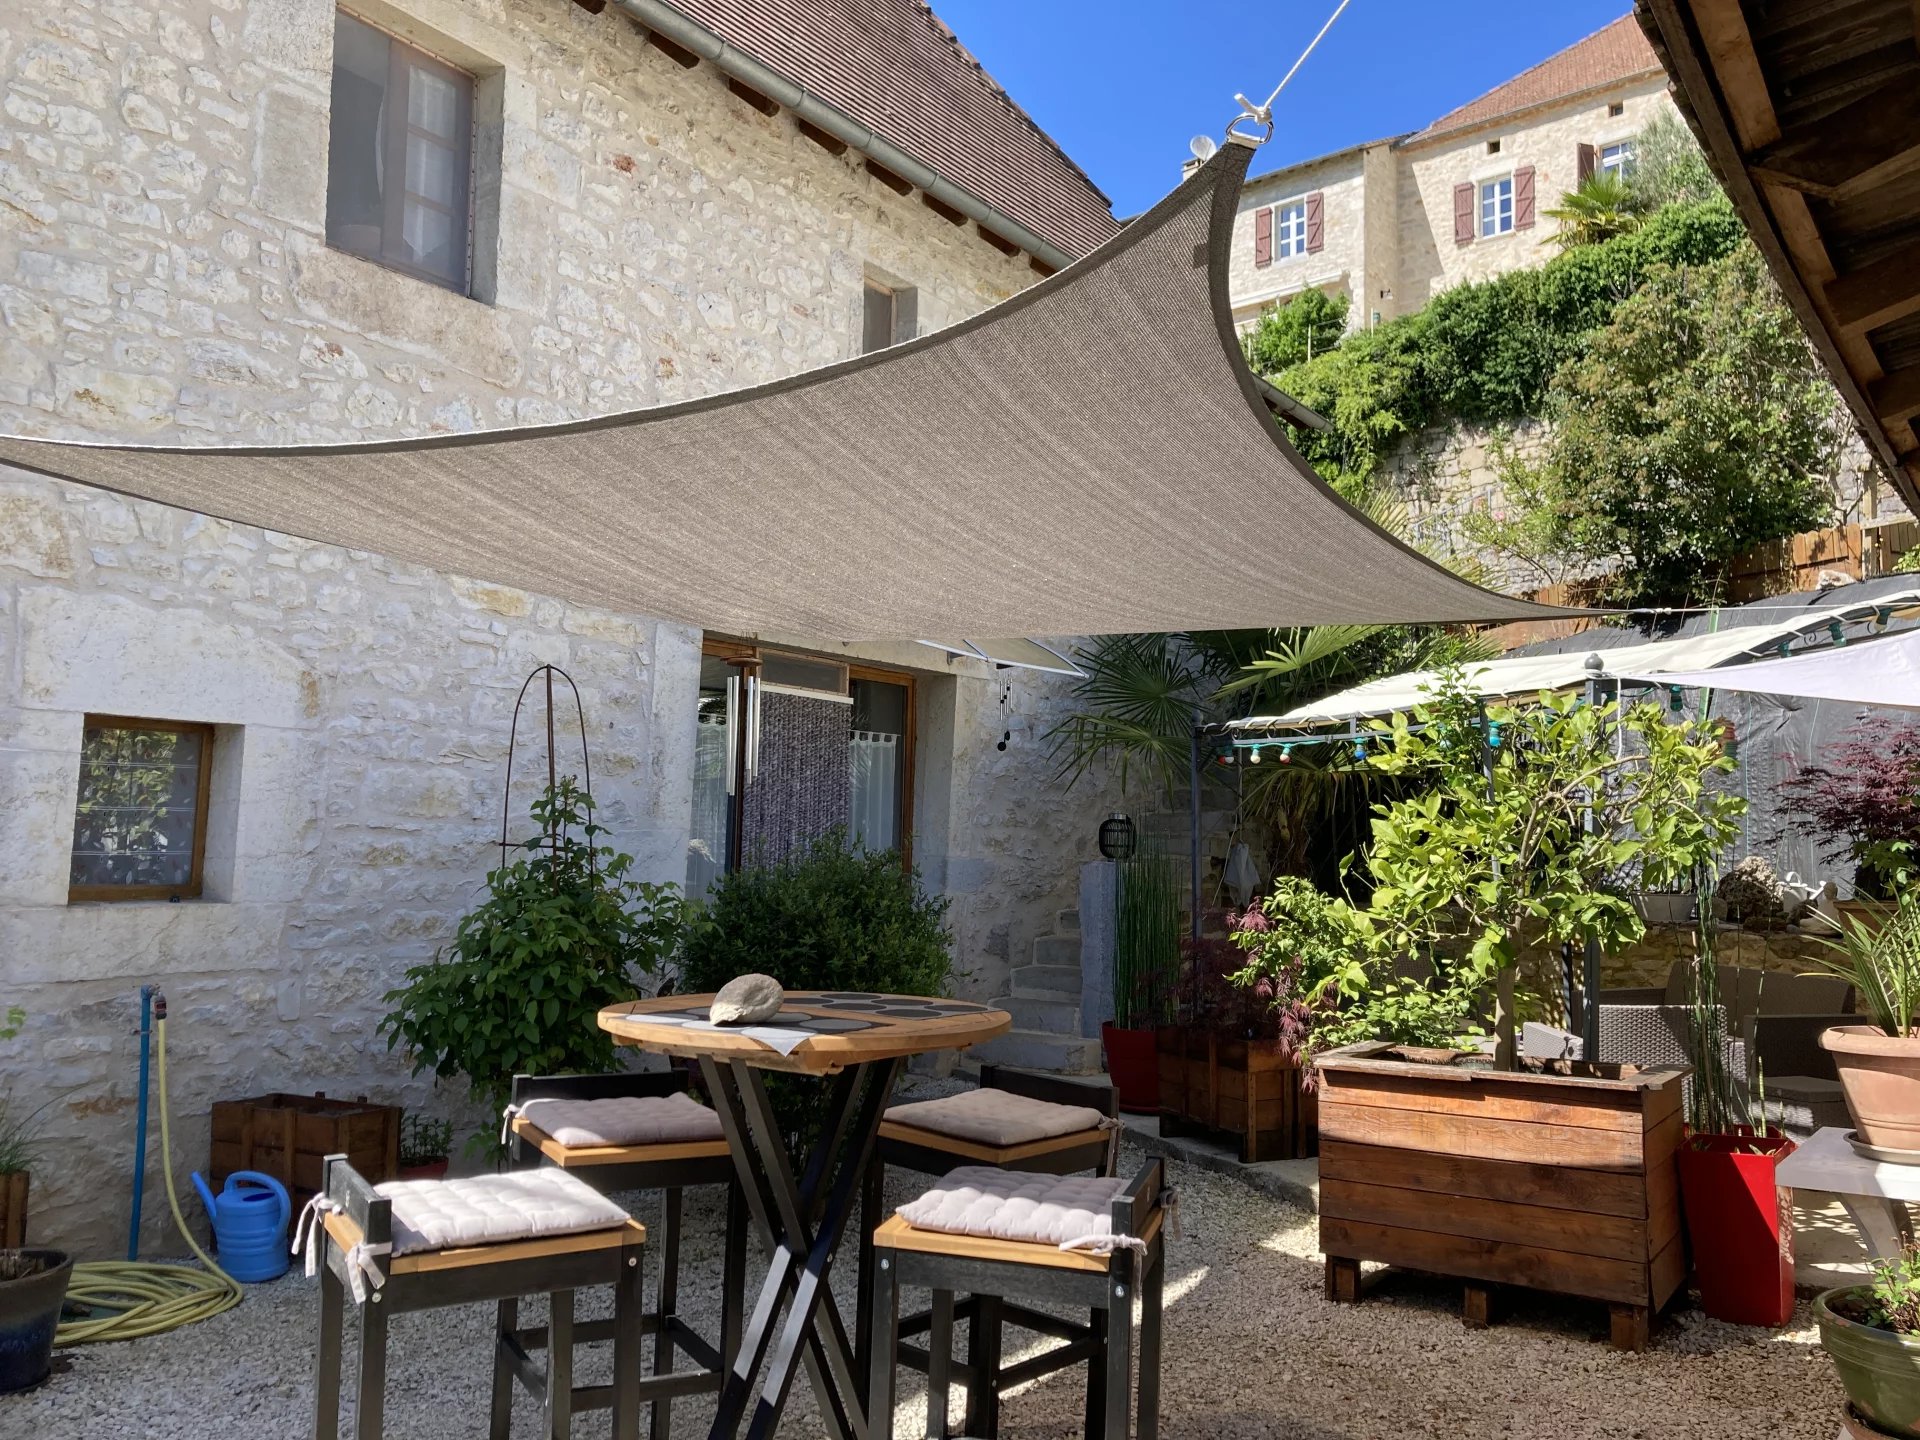 Superb 3 bedroom stone property in the Célé valley